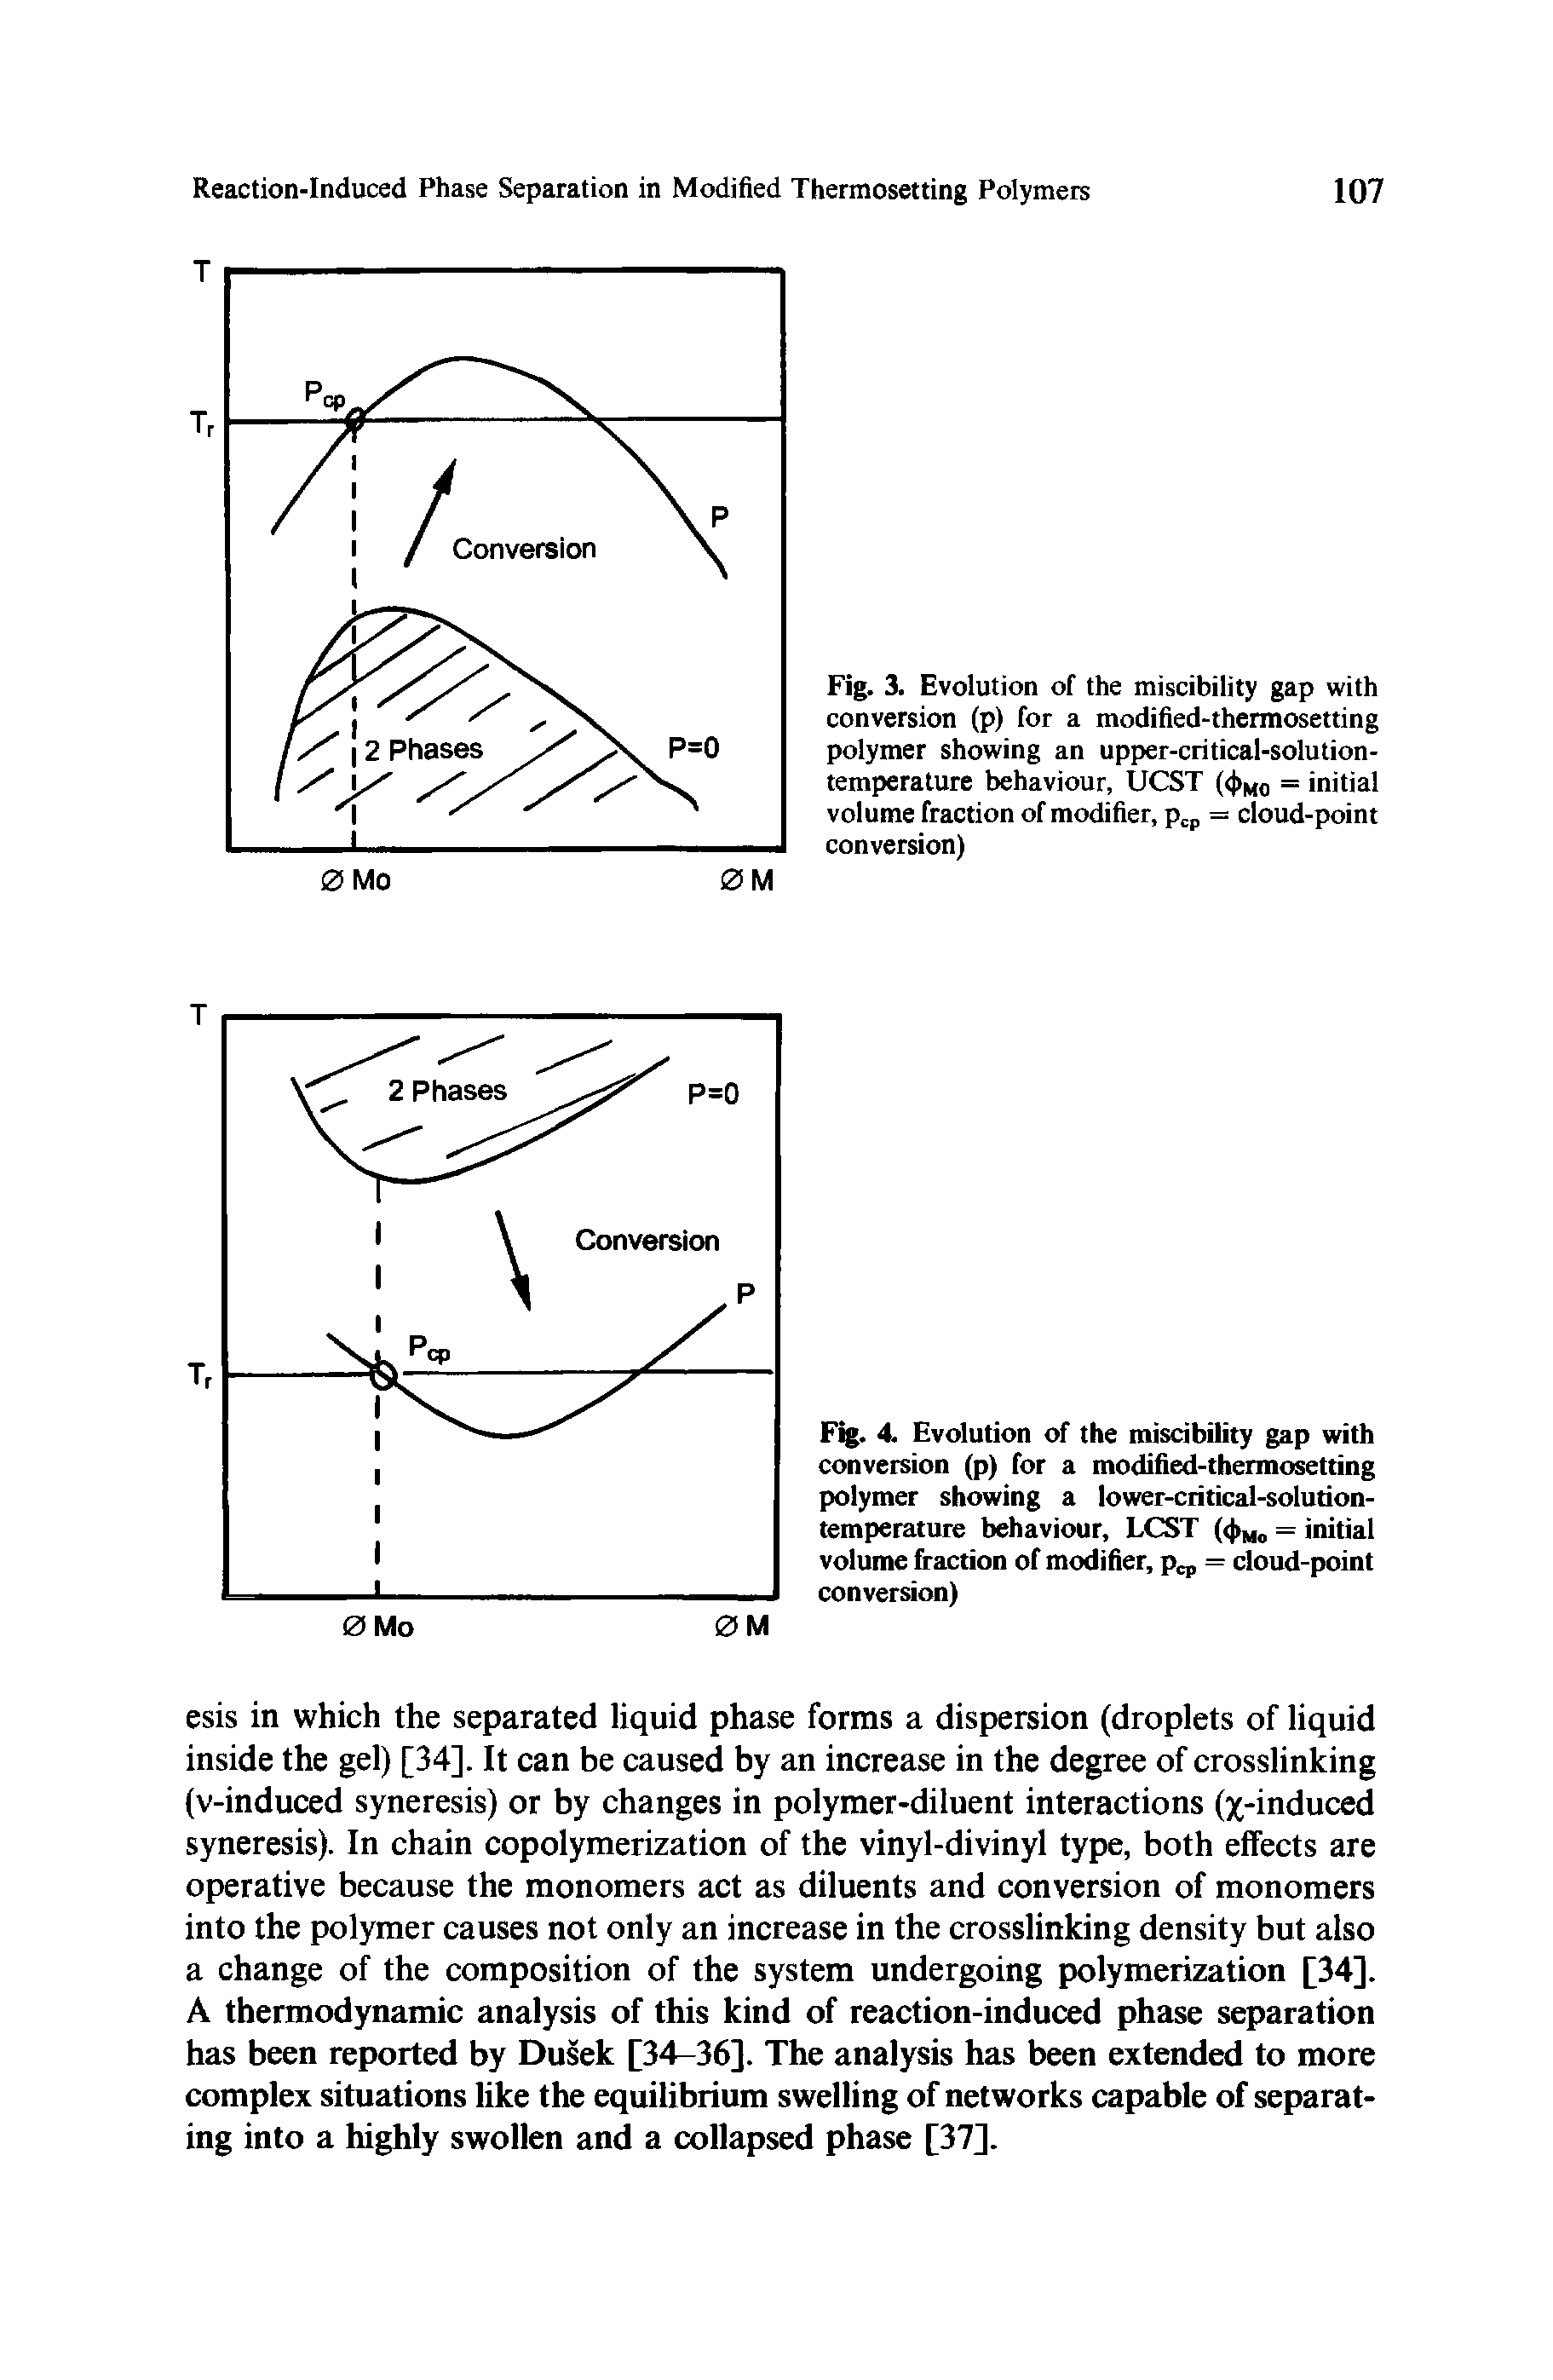 Fig. 4. Evolution of the miscibility gap with conversion (p) for a modified-thermosetting polymer showing a lower-critical-solution-temperature behaviour, LXIST (< ho = initial volume fi-action of modifier, Pcp = cloud-point conversion)...